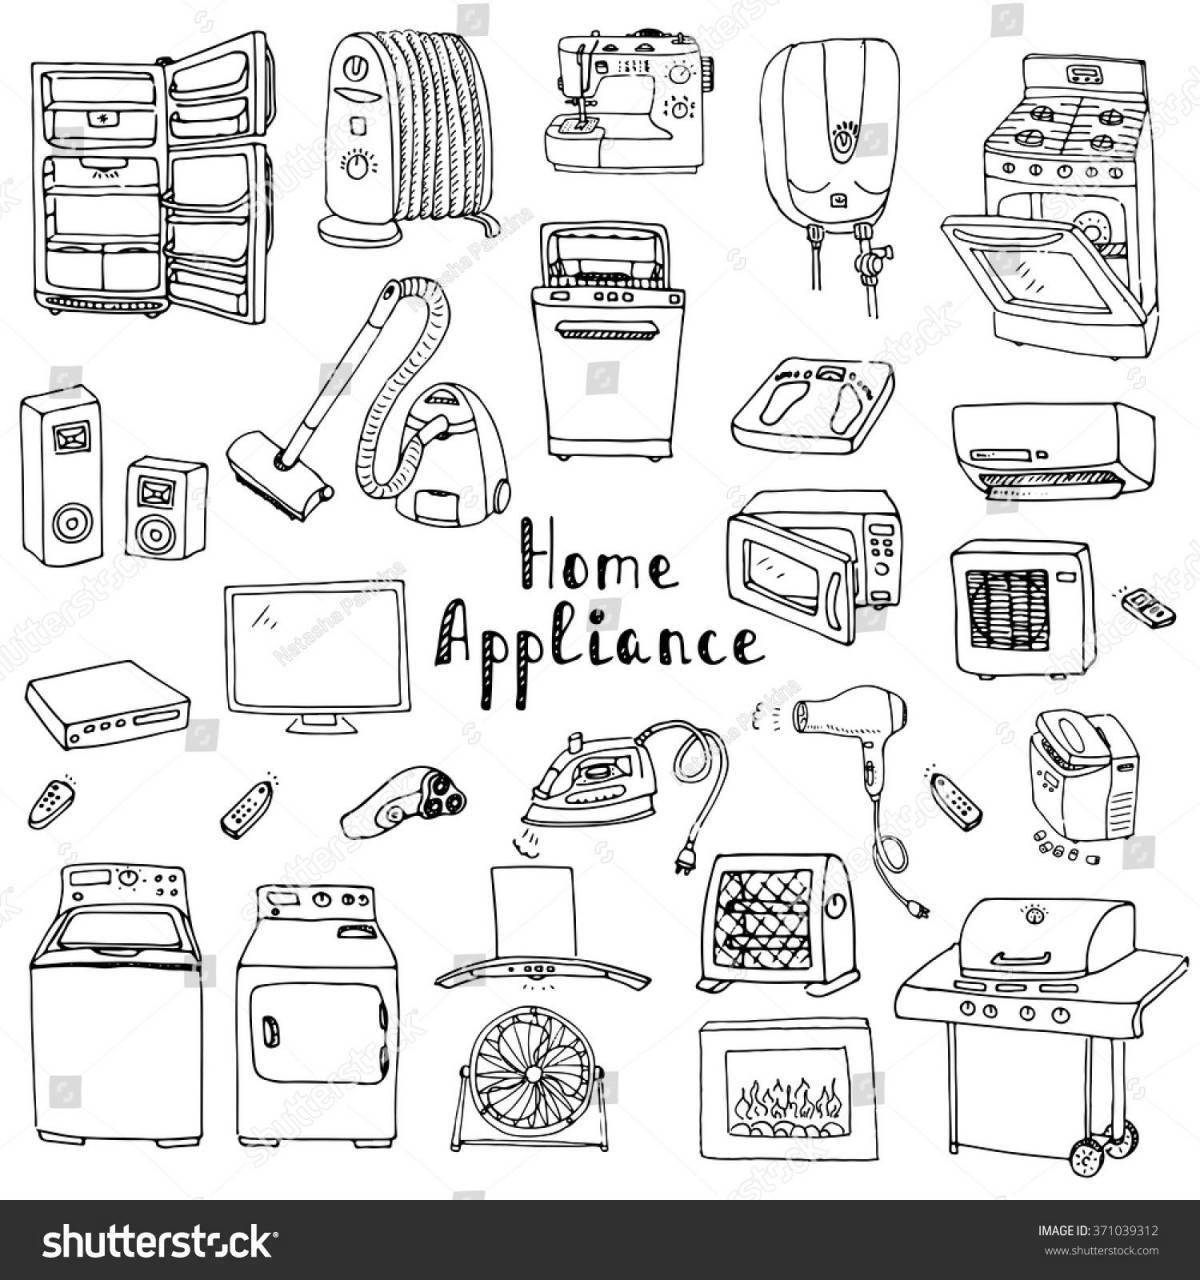 Colouring colorful home appliances